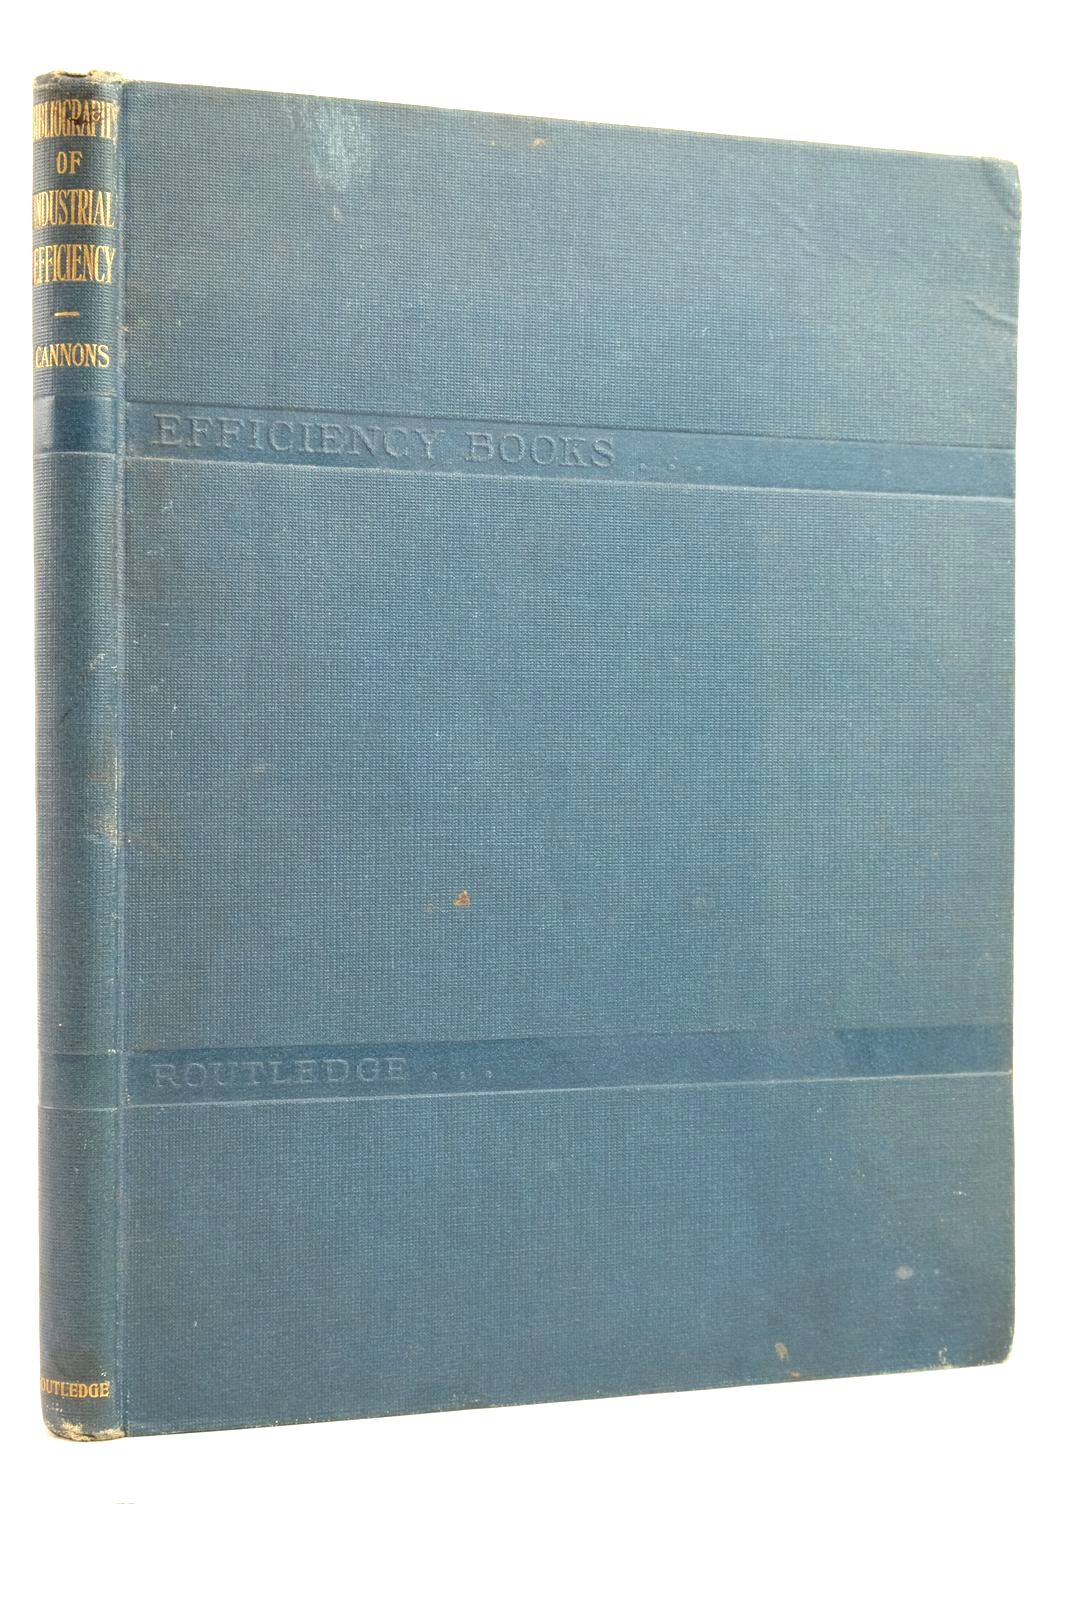 Photo of BIBLIOGRAPHY OF INDUSTRIAL EFFICIENCY AND FACTORY MANAGEMENT (BOOKS, MAGAZINE ARTICLES, ETC.) written by Canons, H.G.T. published by George Routledge & Sons Ltd. (STOCK CODE: 2136072)  for sale by Stella & Rose's Books